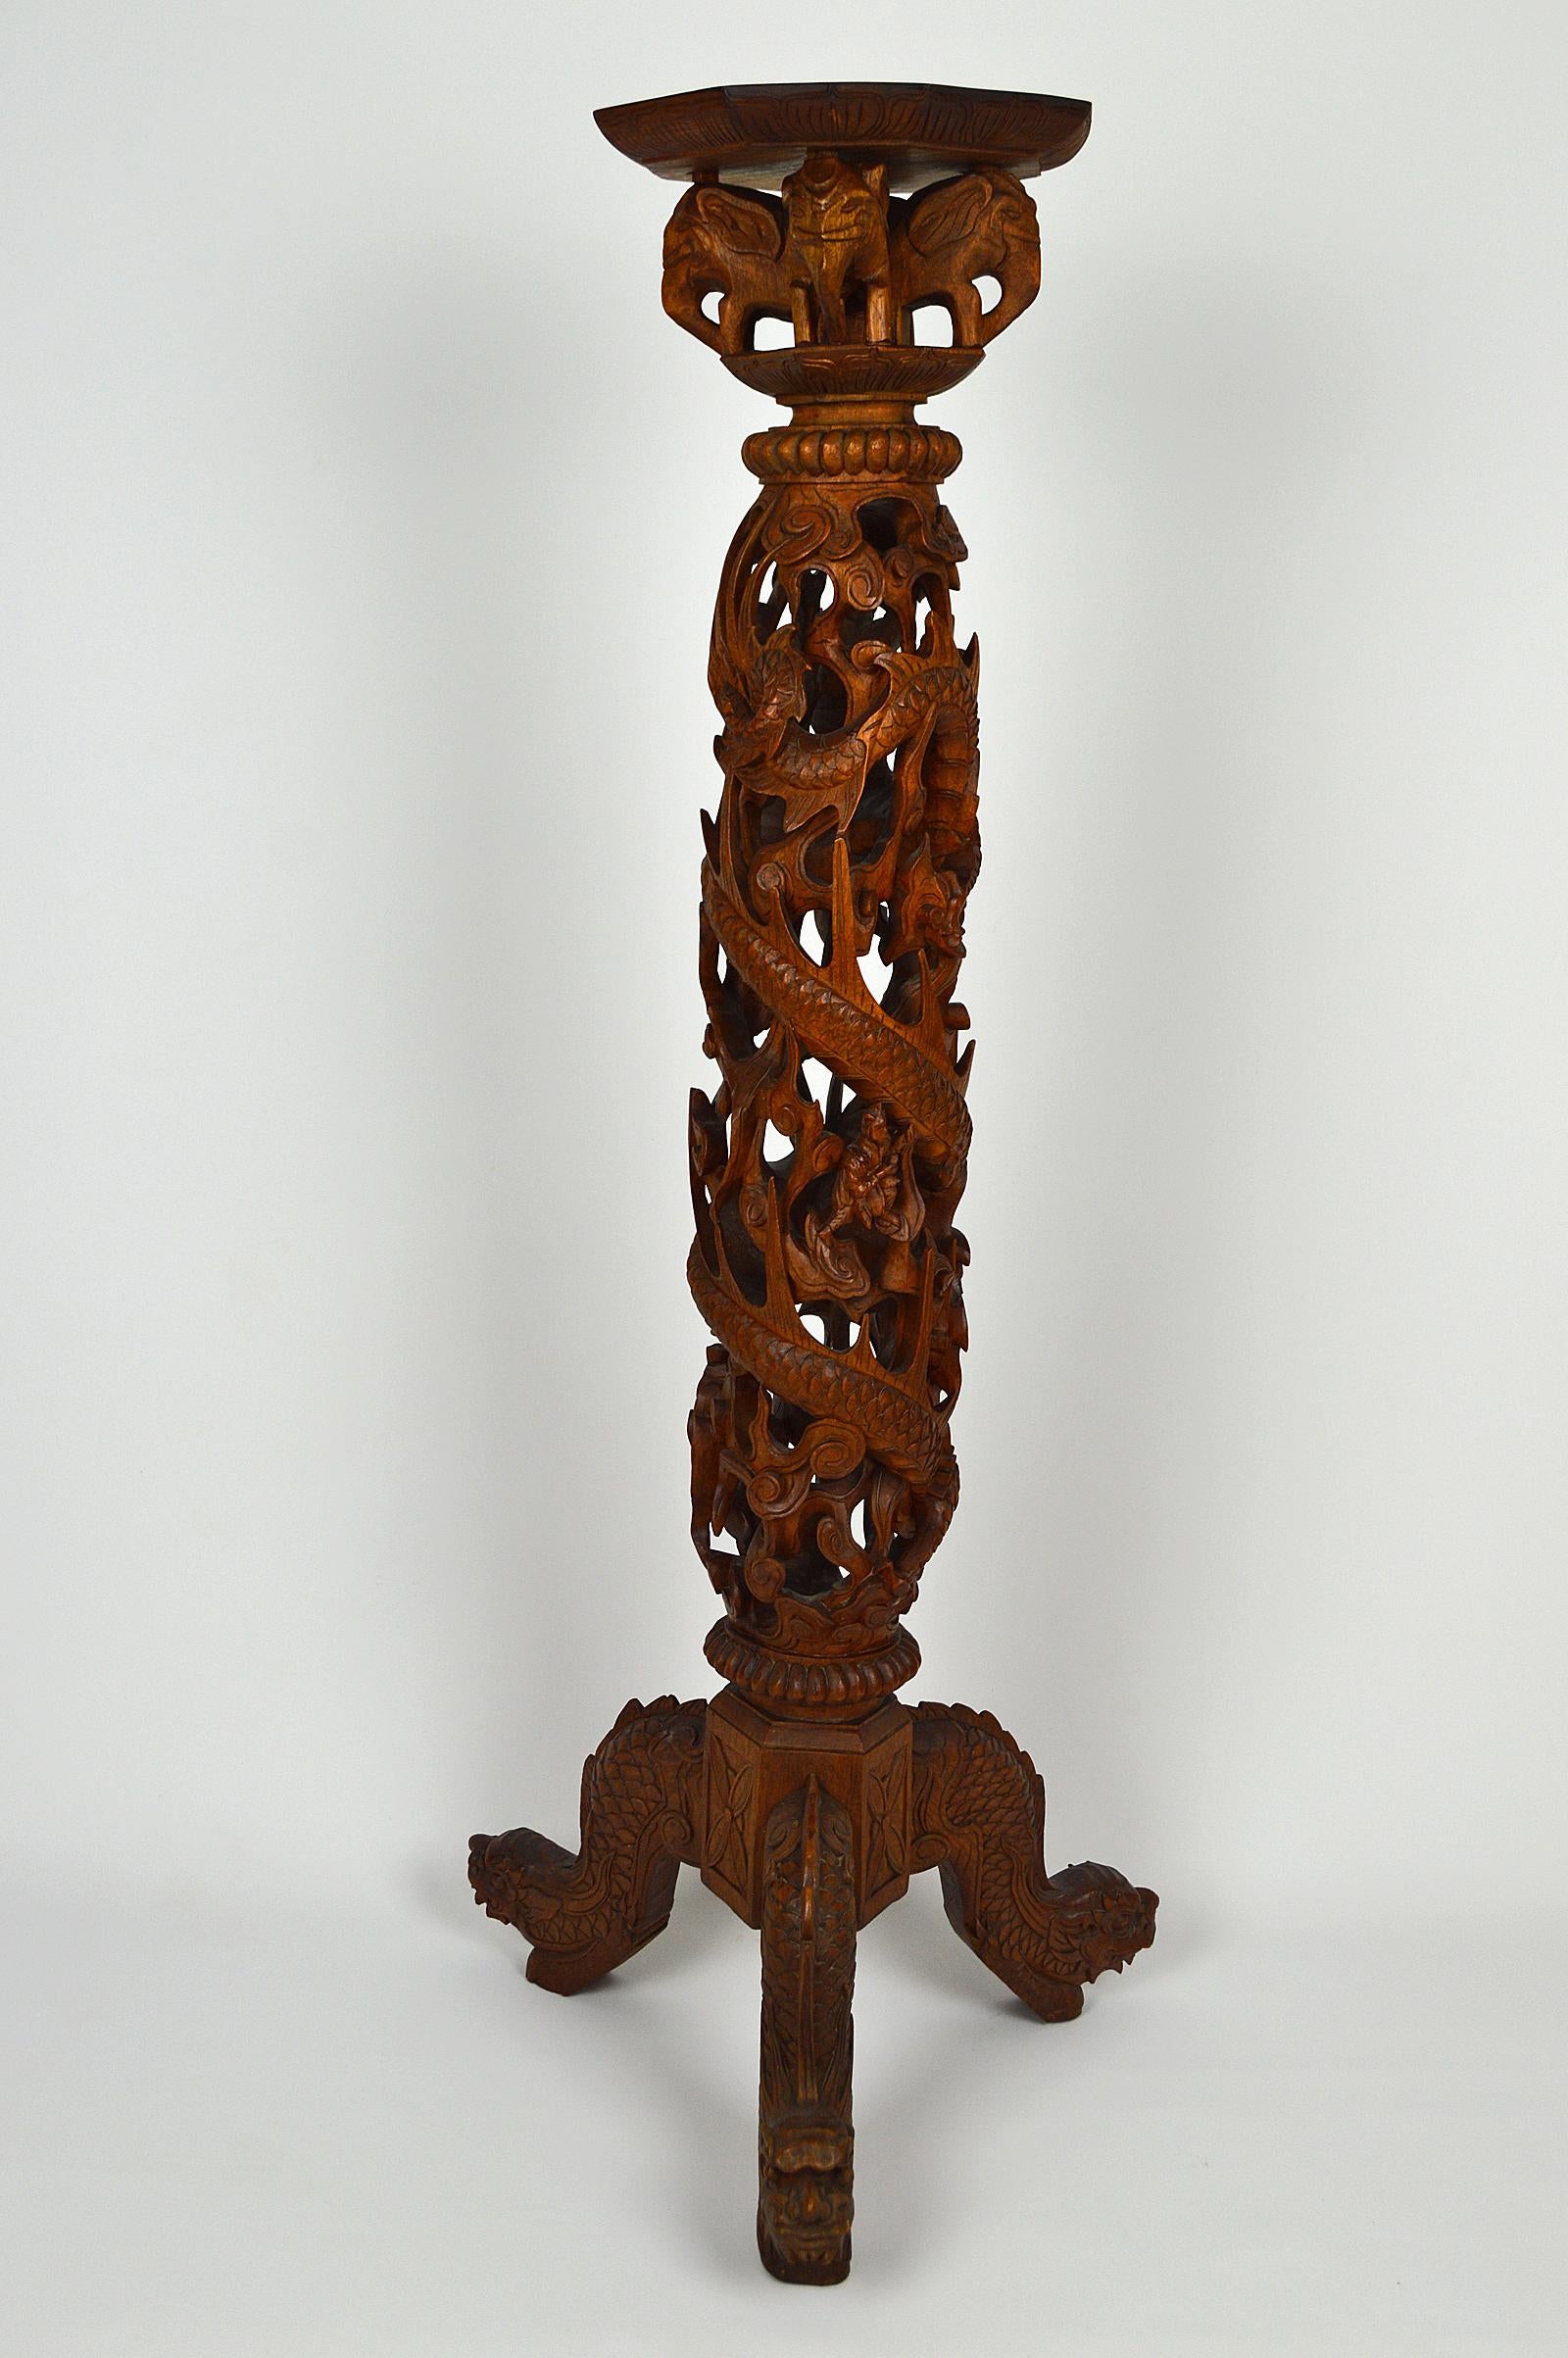 Chinese Export Asian Pedestal Table in Carved Wood on a Mythological Theme, circa 1890 For Sale